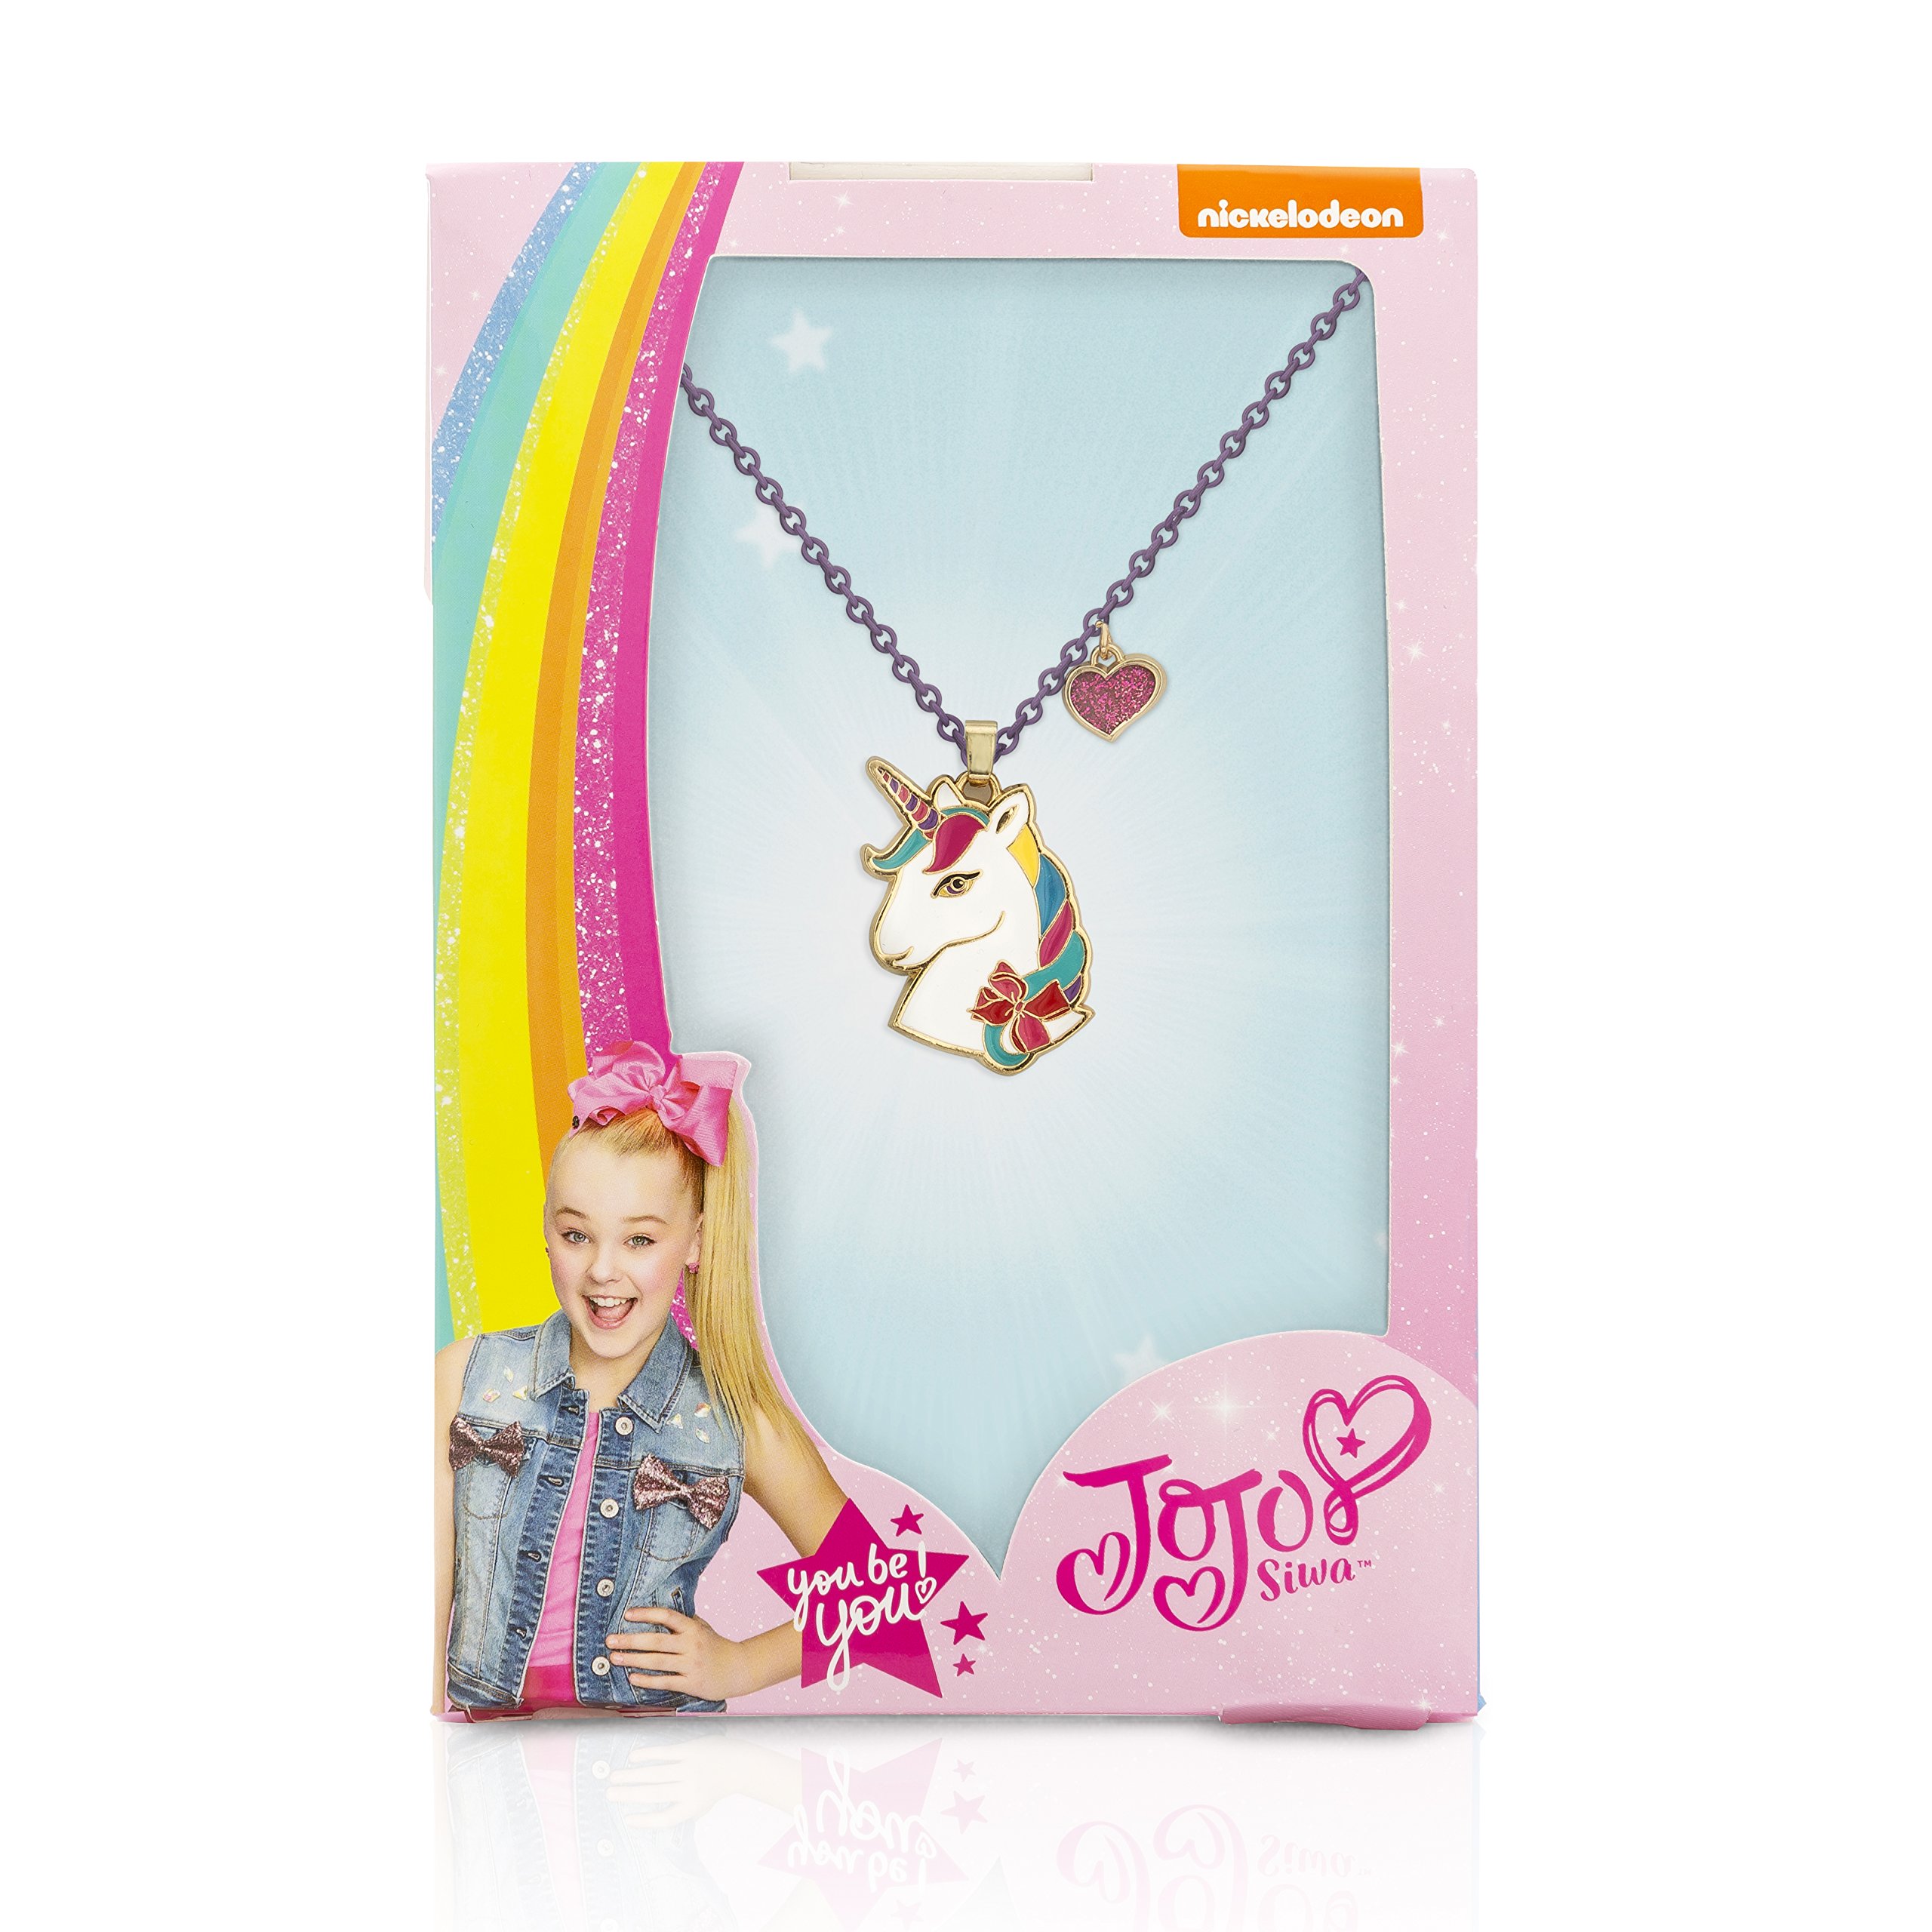 JoJo Siwa Girls Fashion Bow Necklace - JoJo Necklace 16-Inch with 3-Inch Extender Gifts for Girls